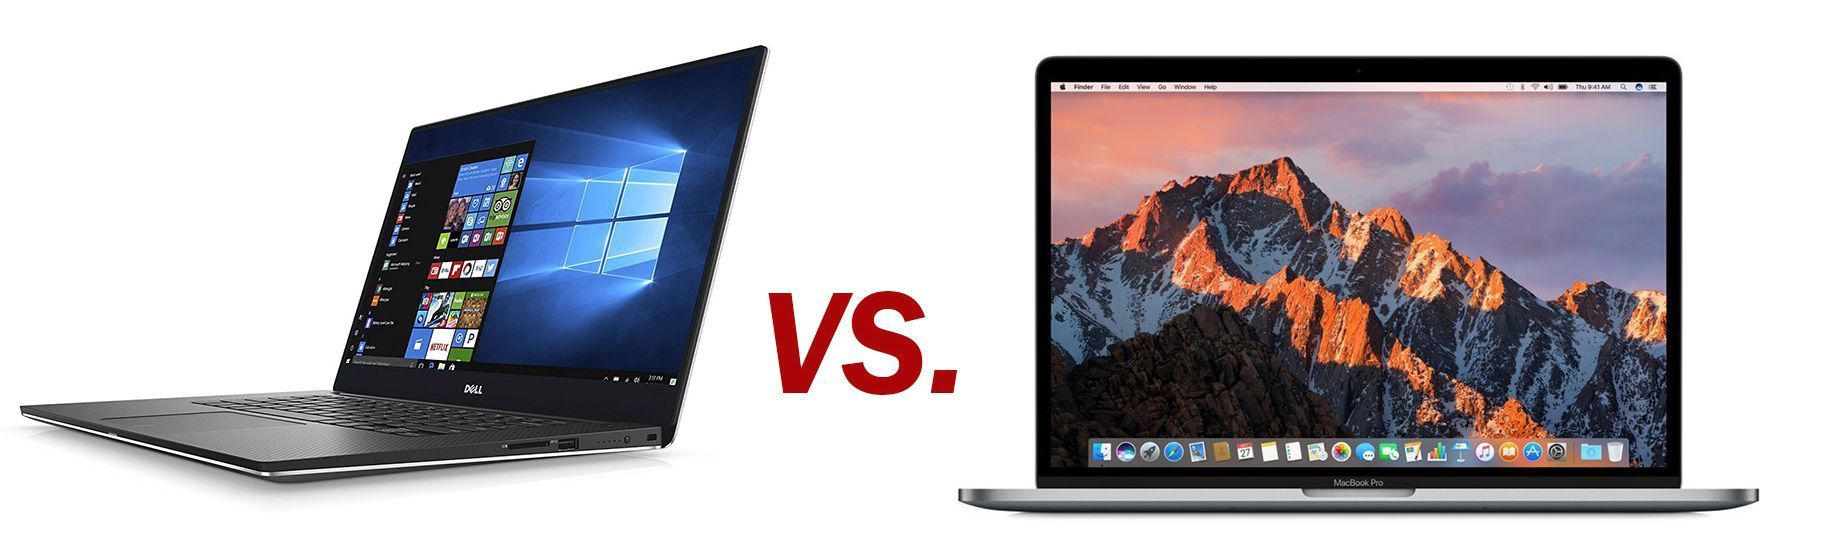 Mac Or Pc For Video Editing